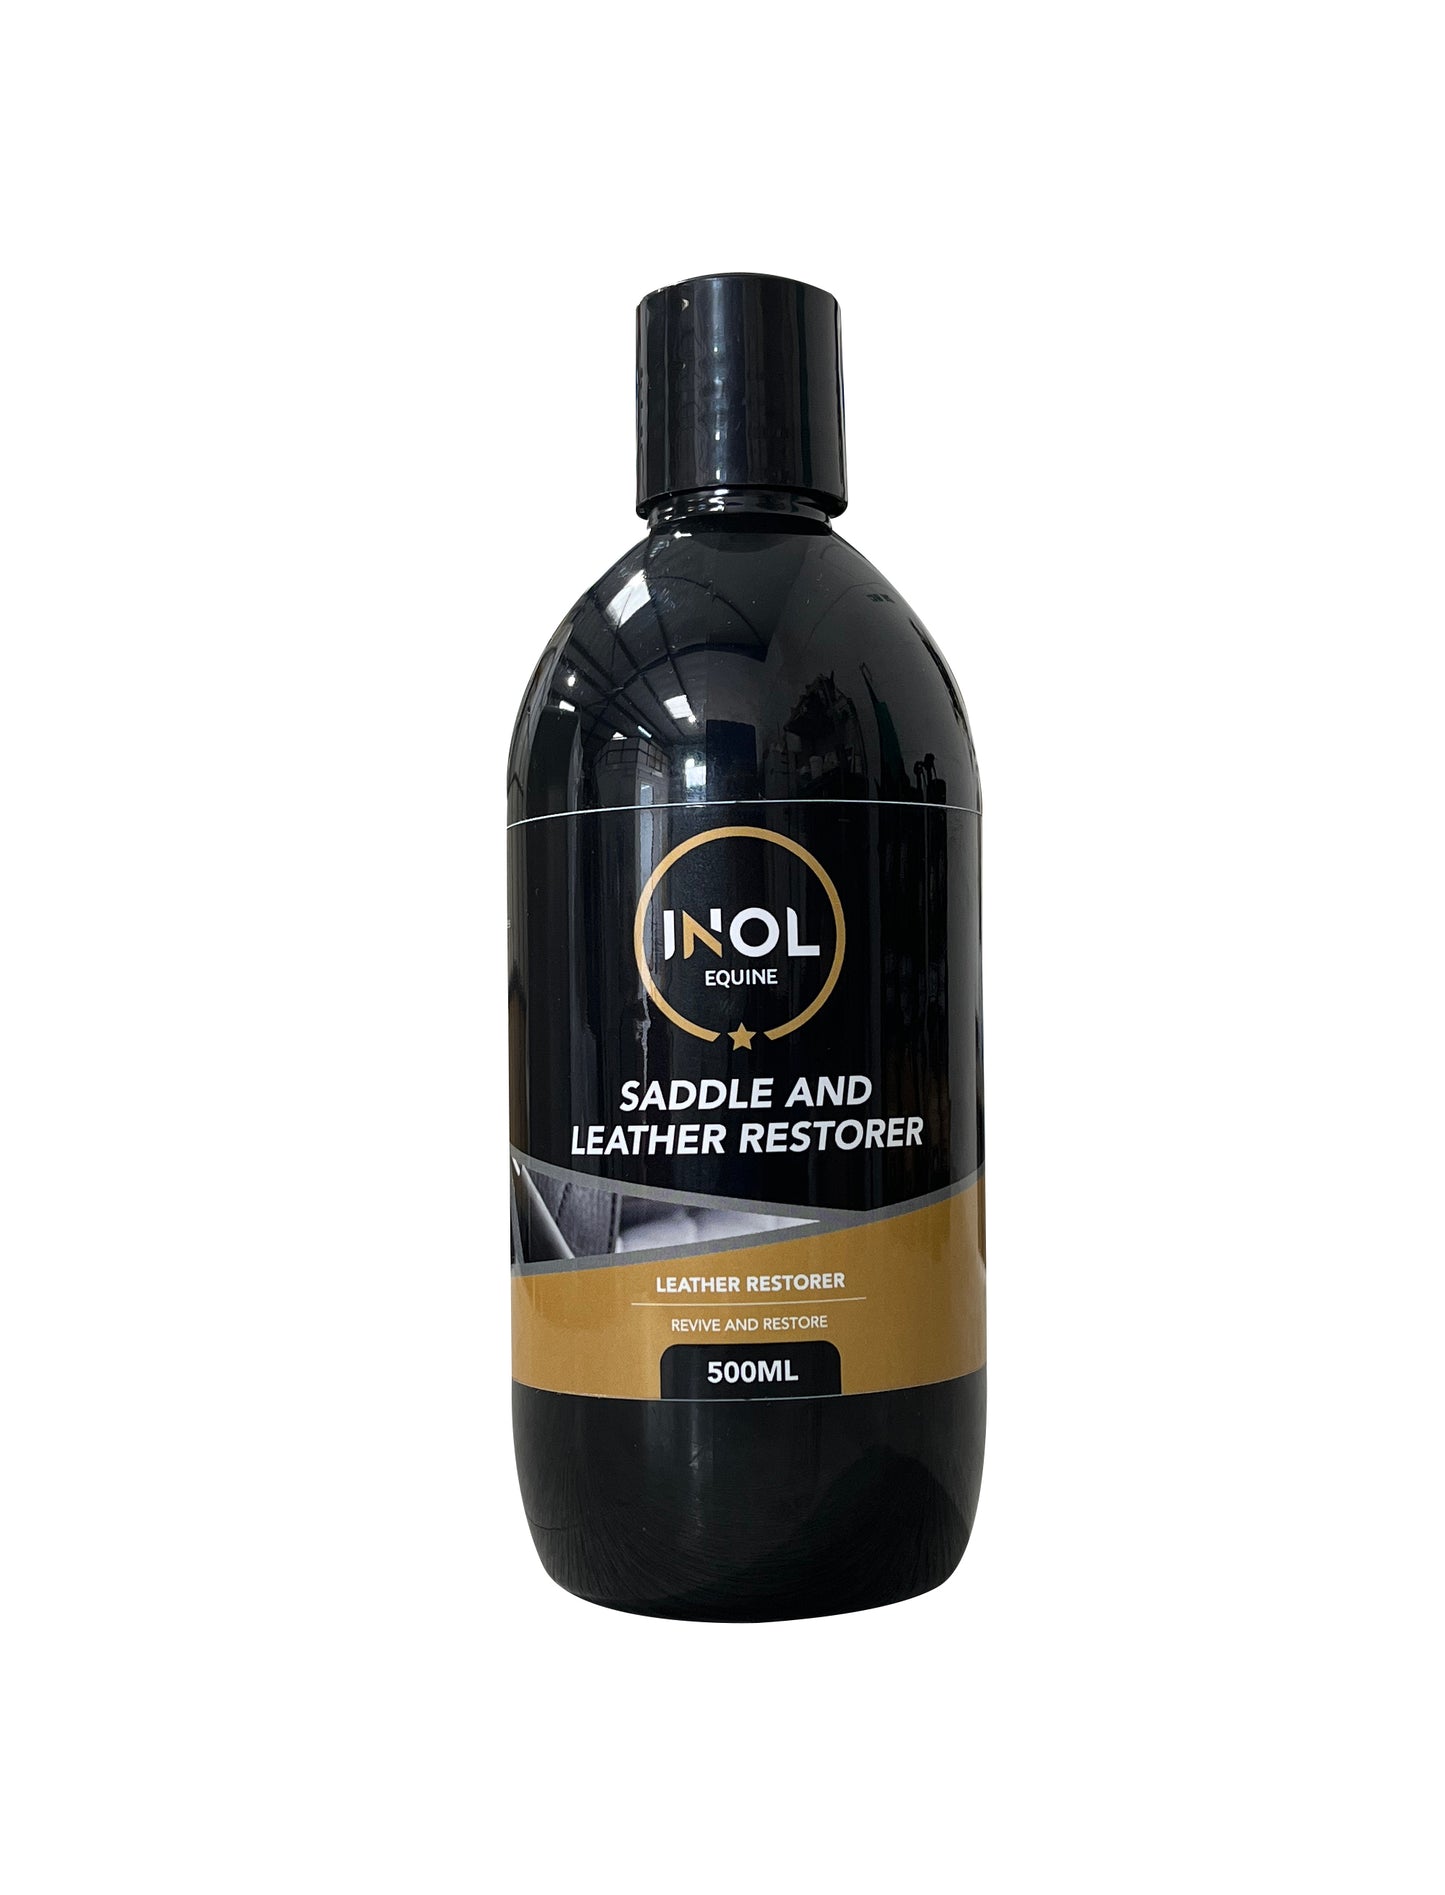 Saddle and Leather Restorer 500ml